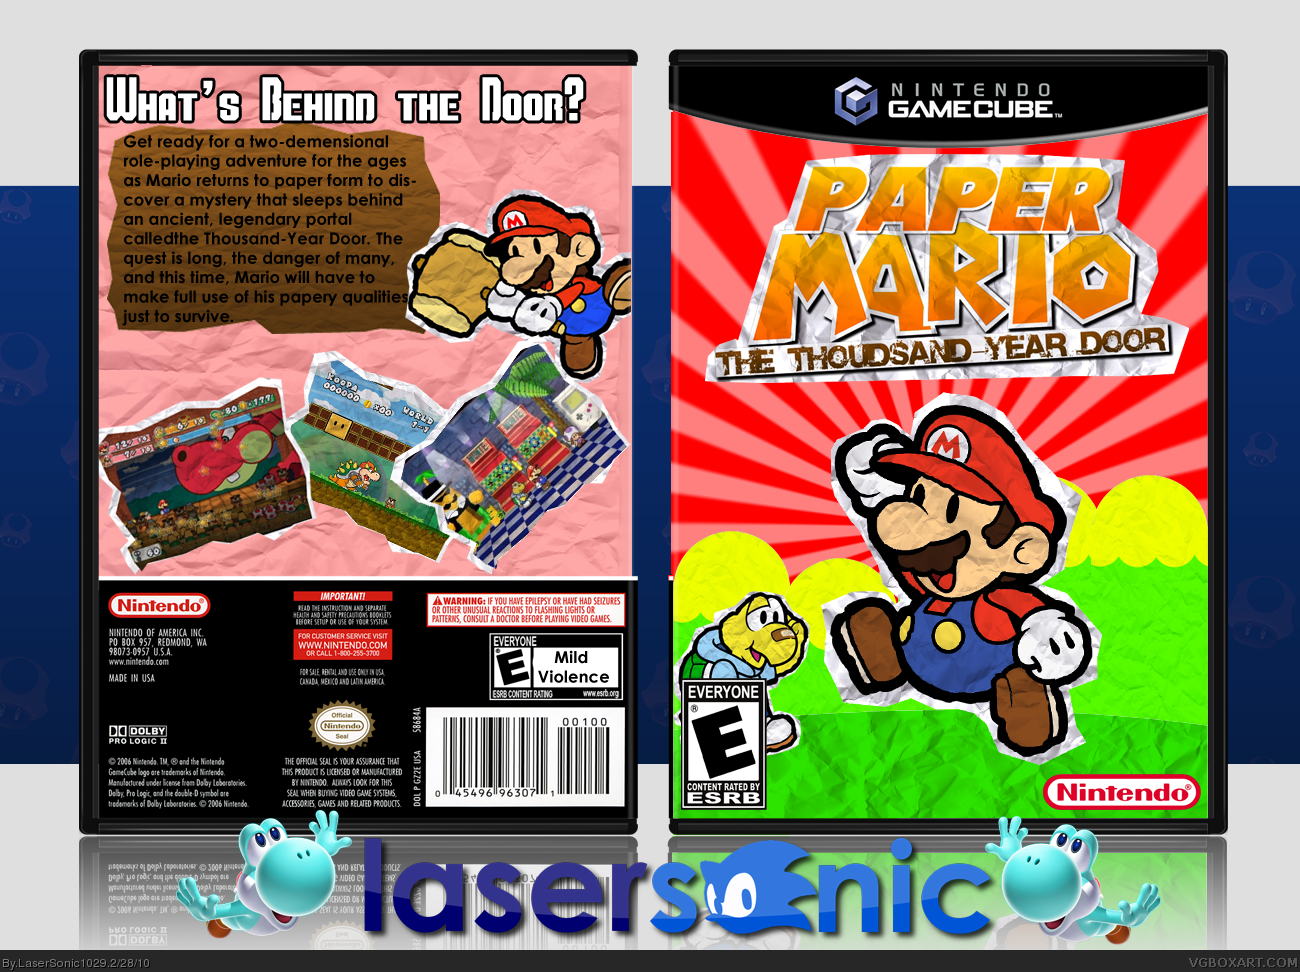 Paper Mario: The Thousand-Year Door box cover